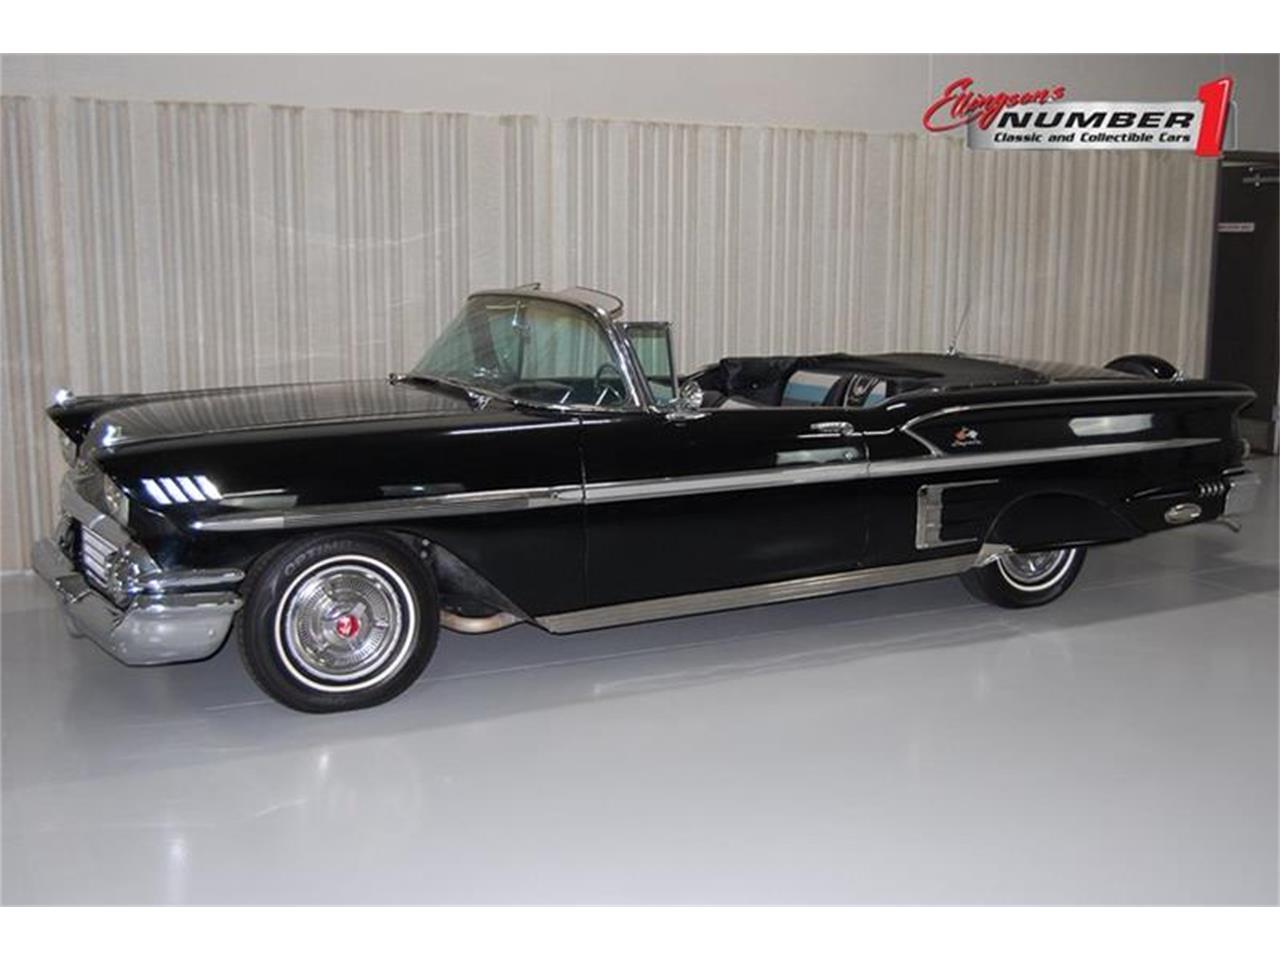 1958 Chevrolet Impala for sale in Rogers, MN – photo 4